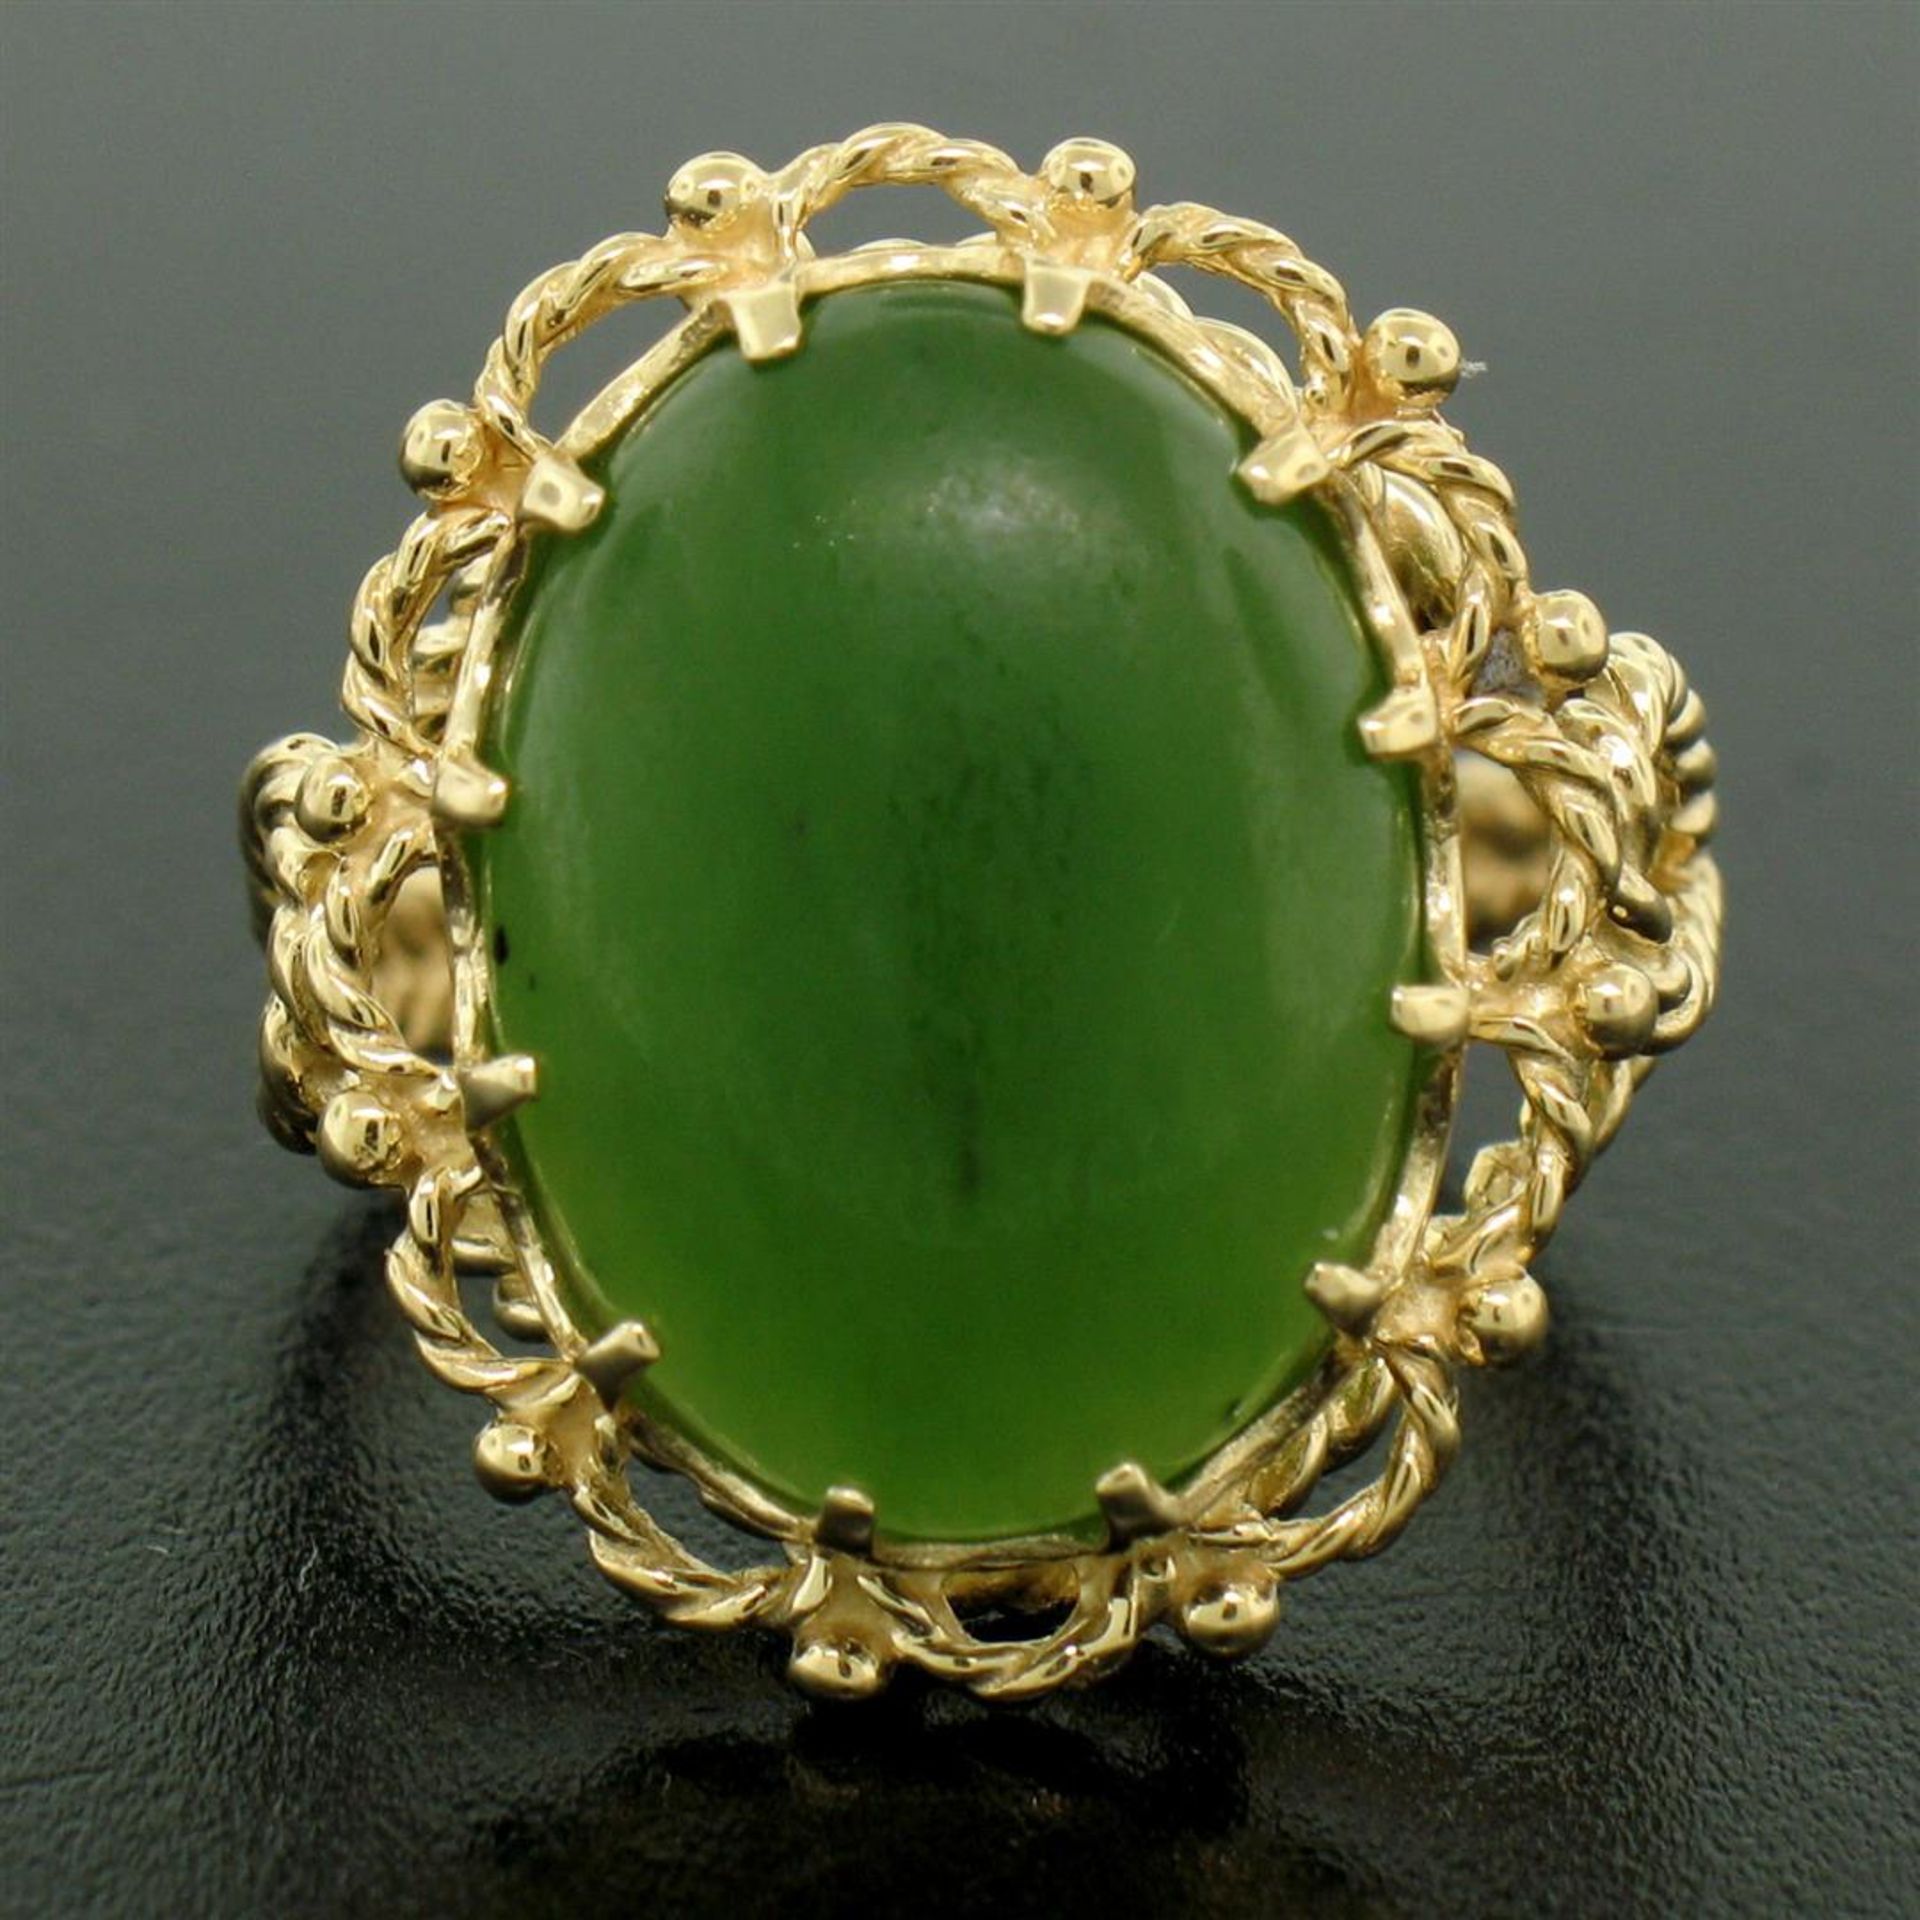 14k Yellow Gold Prong Set Cabochon Olive Green Nephrite Jade Twisted Wire Ring - Image 6 of 8